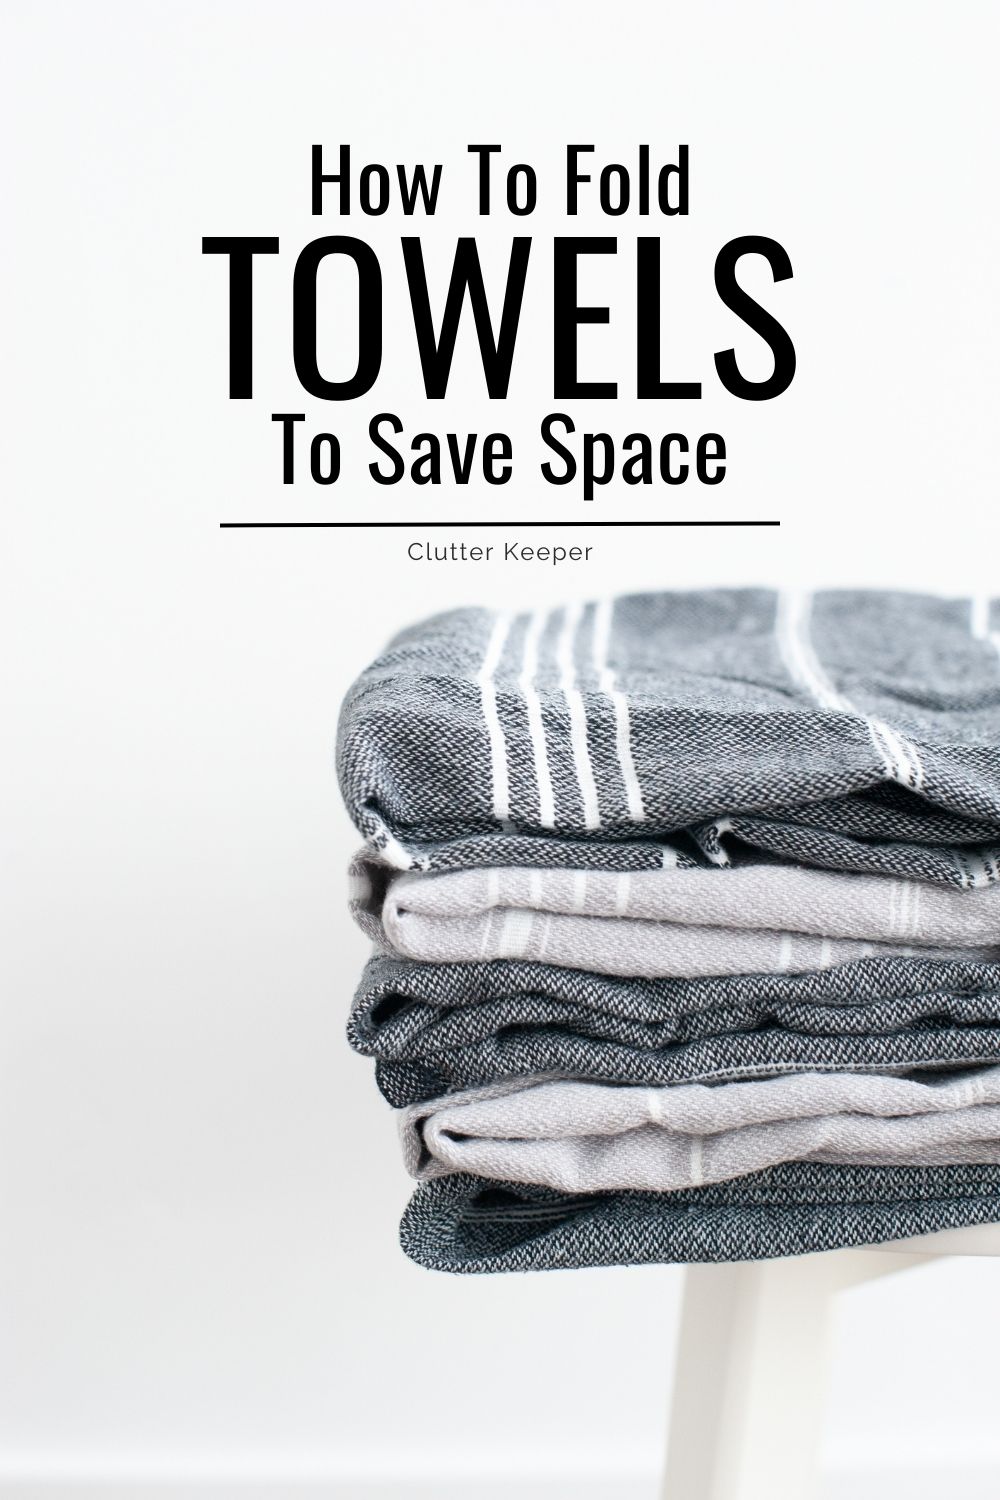 How to fold towels to save space.